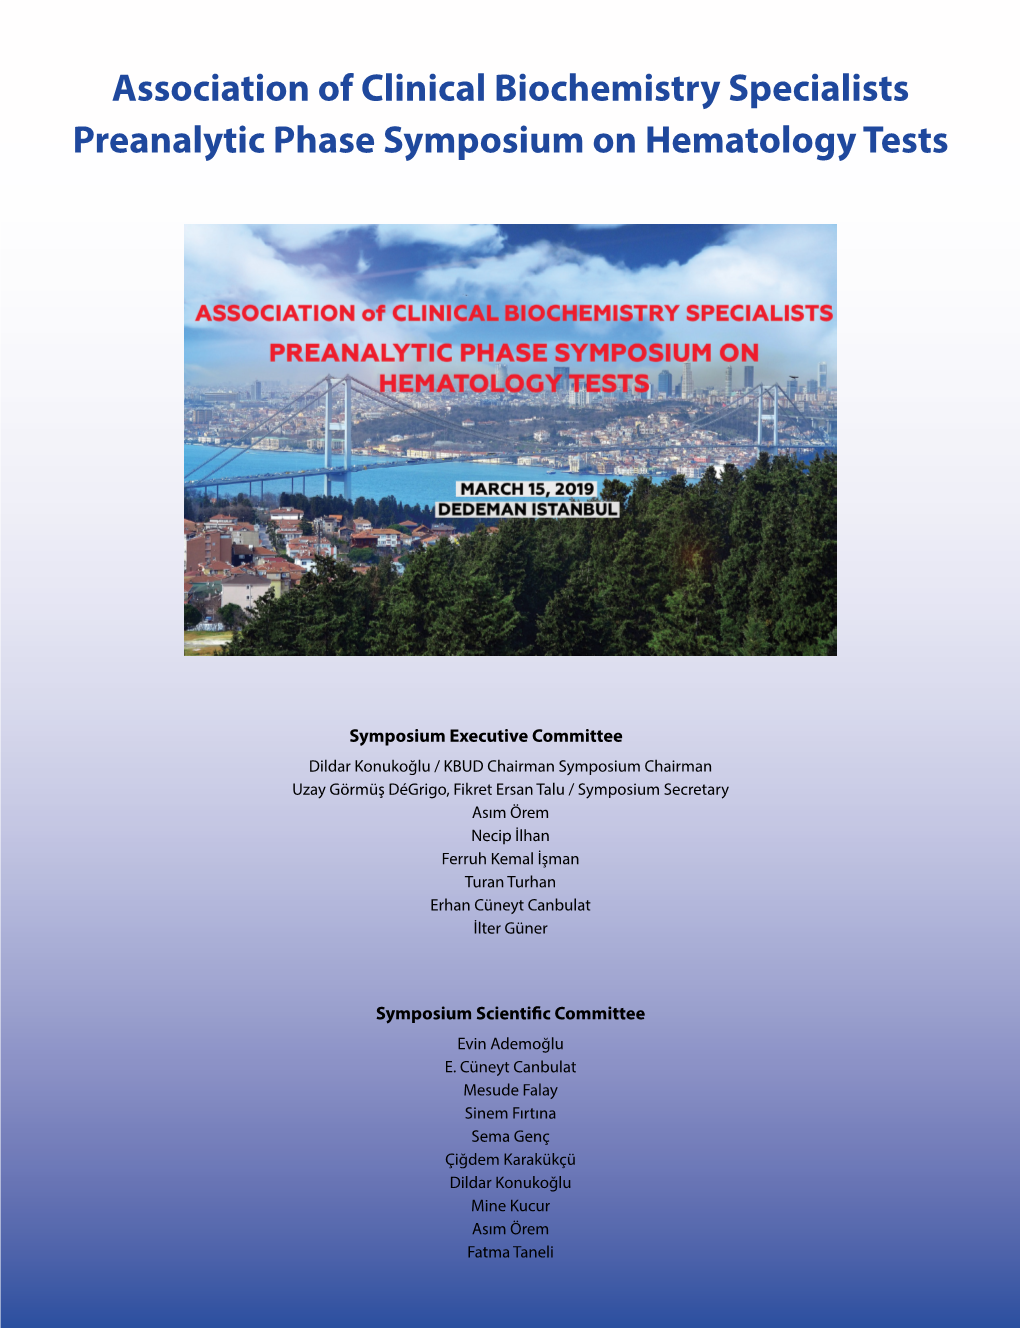 Association of Clinical Biochemistry Specialists Preanalytic Phase Symposium on Hematology Tests